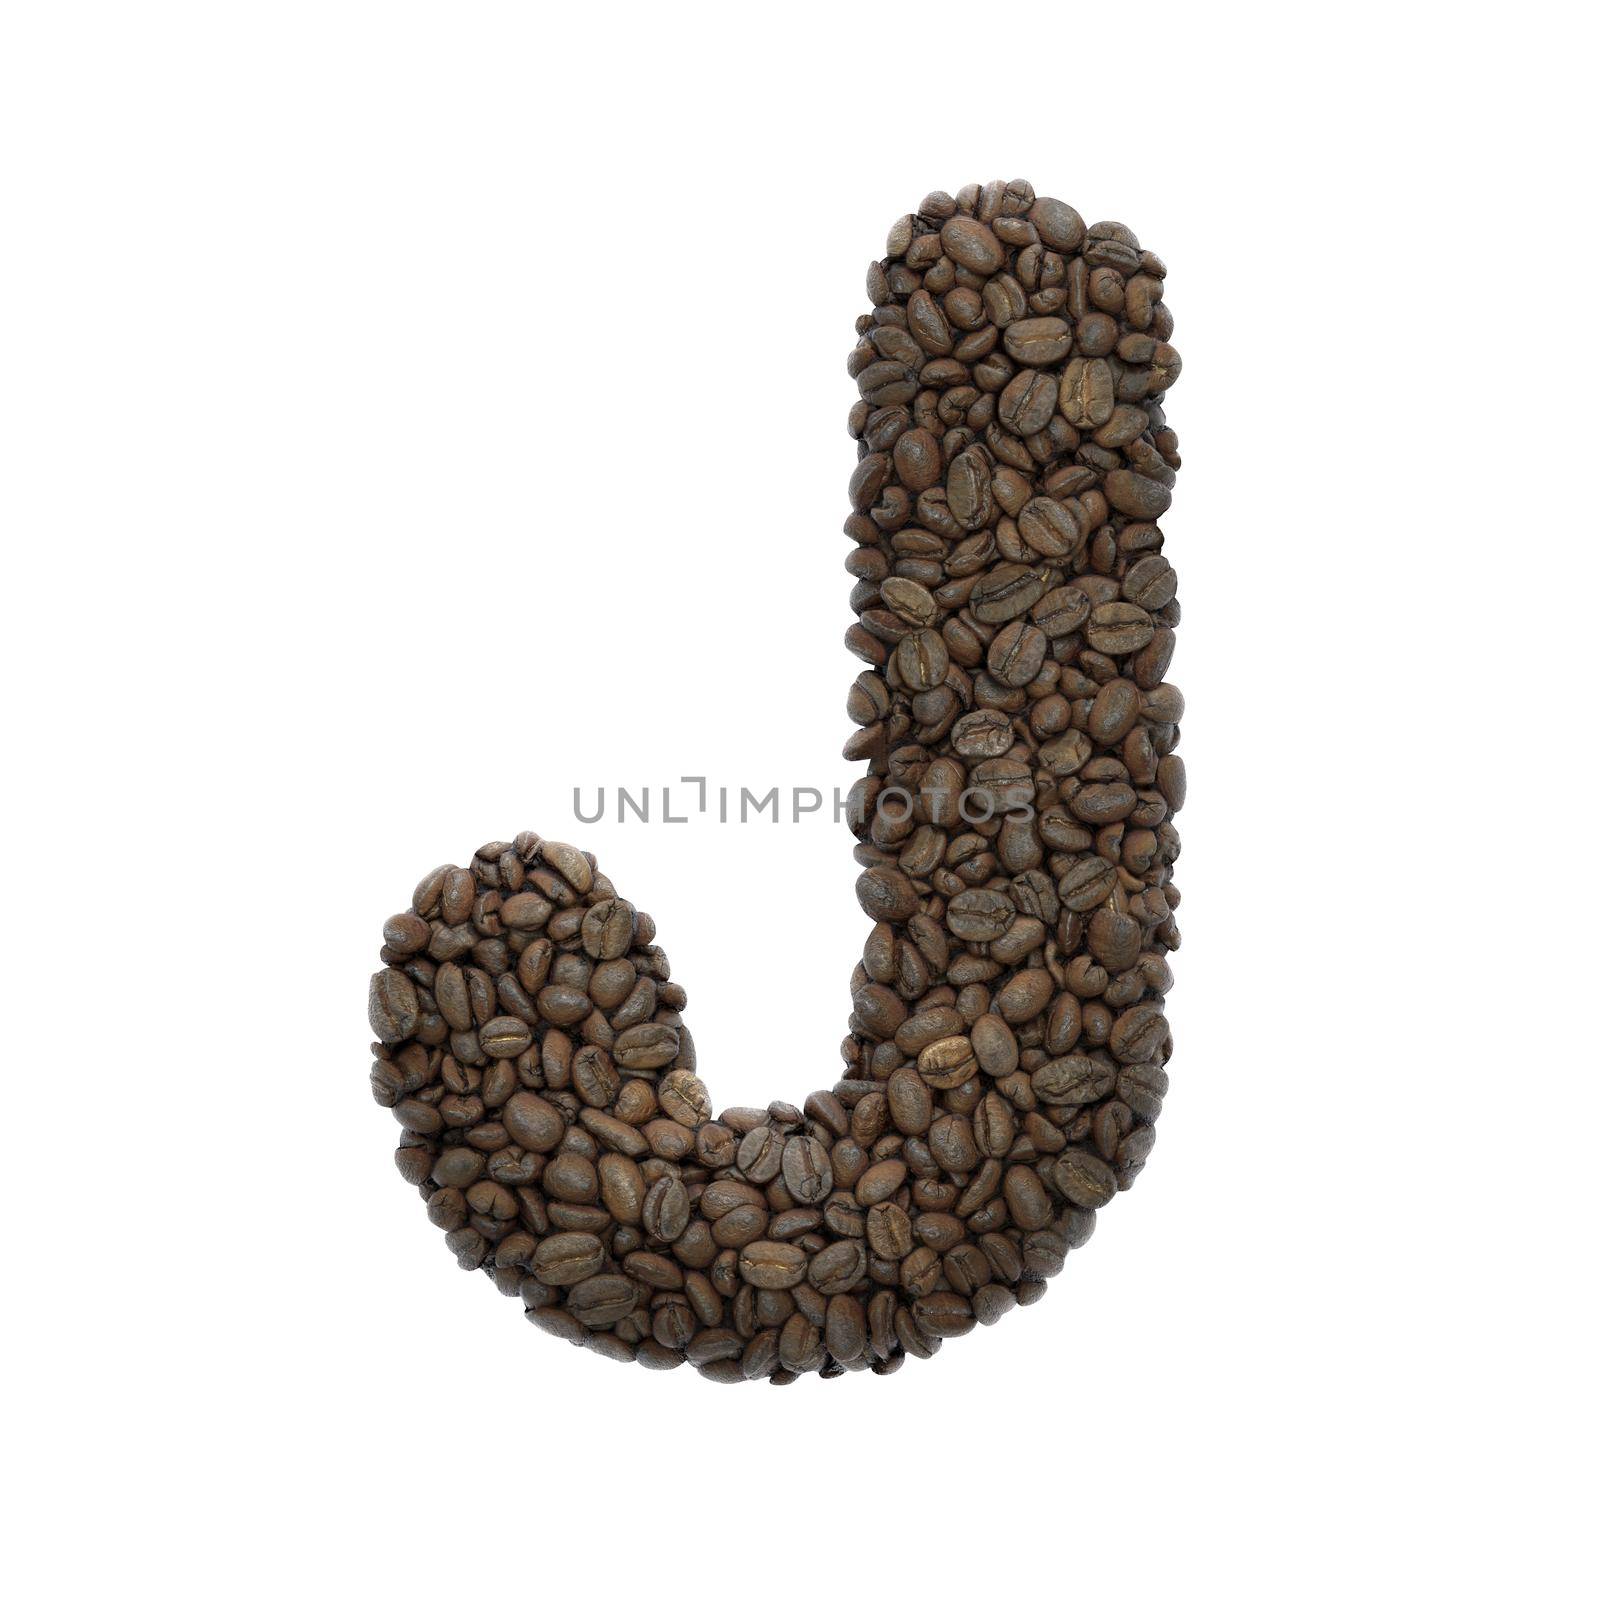 Coffee letter J - large 3d roasted beans font isolated on white background. This alphabet is perfect for creative illustrations related but not limited to Coffee, energy, insomnia...